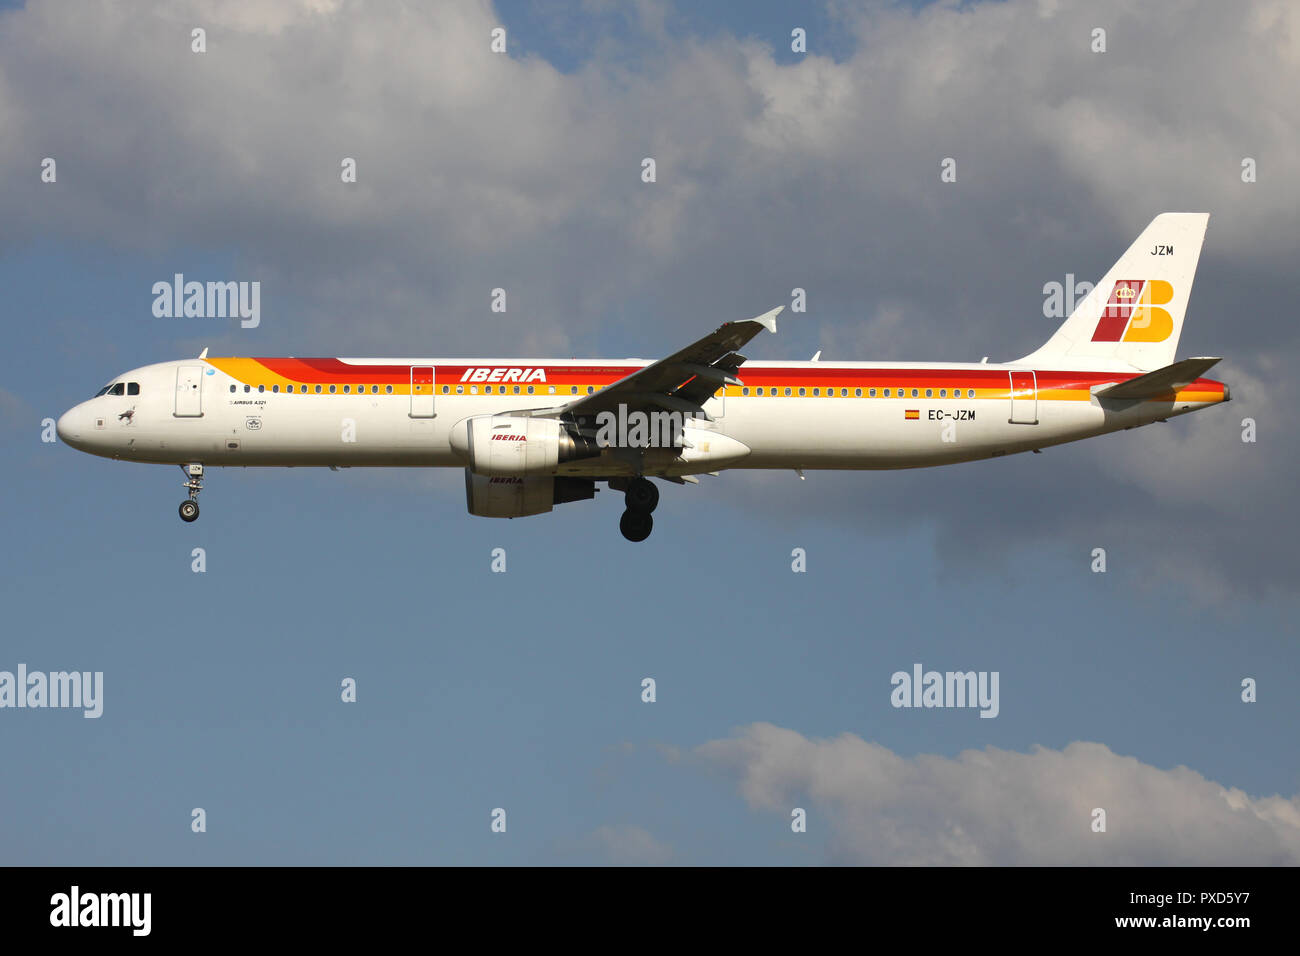 Spanish Iberia Airbus A321-200 (old livery) with registration EC-JZM on short final for runway 01 of Brussels Airport. Stock Photo